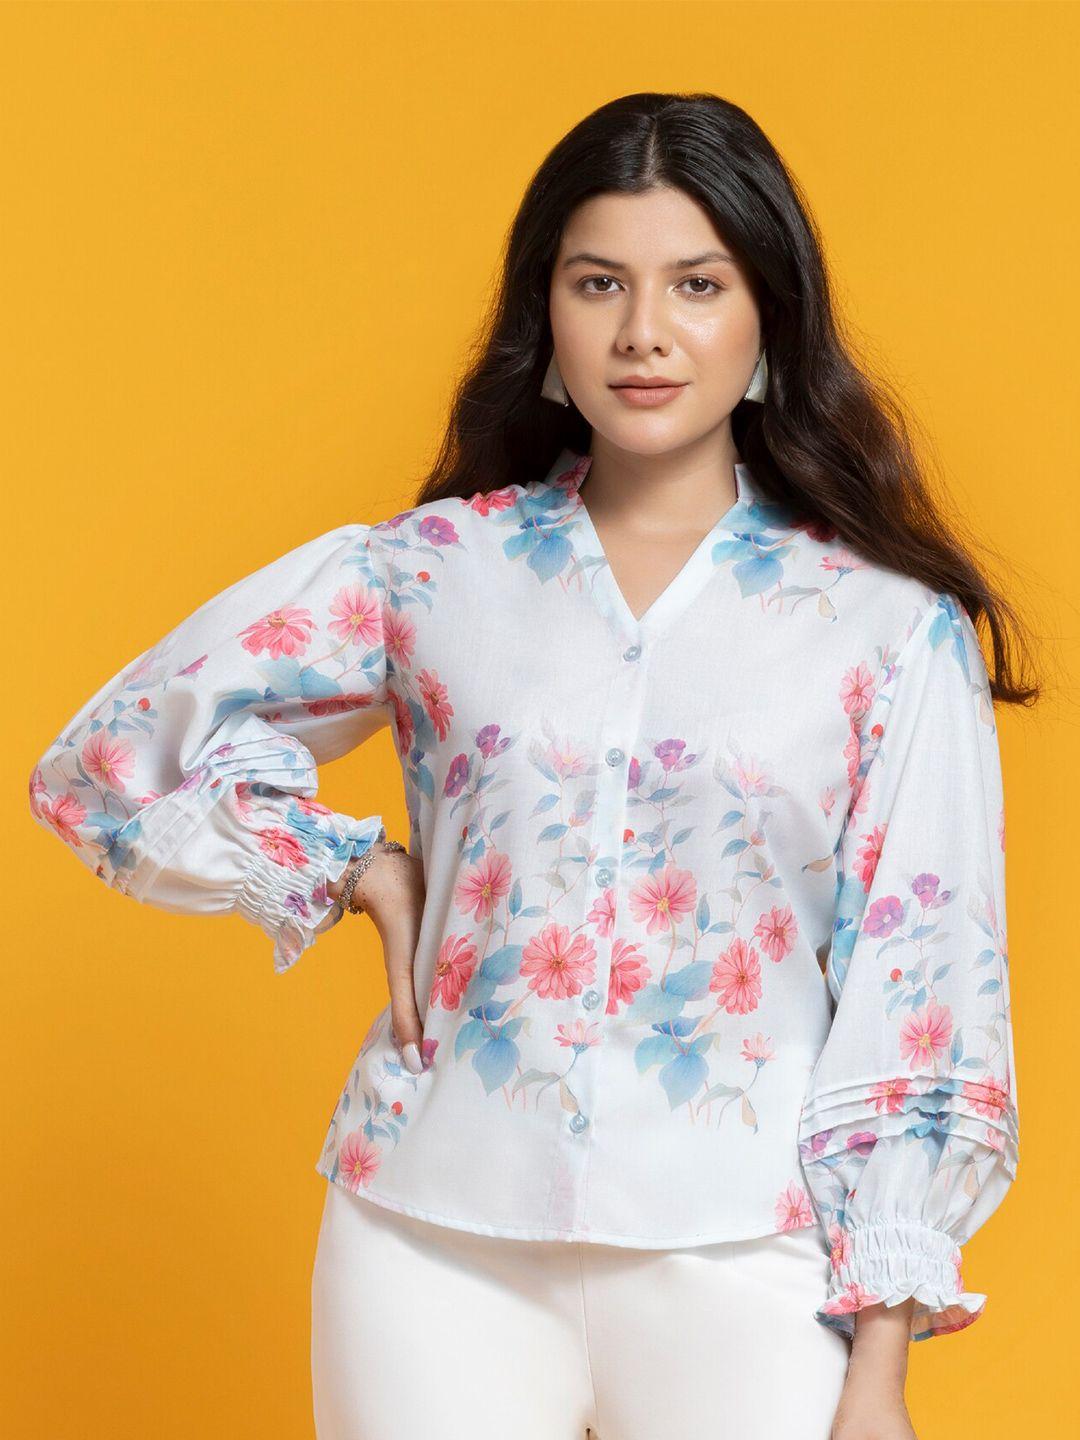 sew you soon blue floral print puff sleeve cotton shirt style top